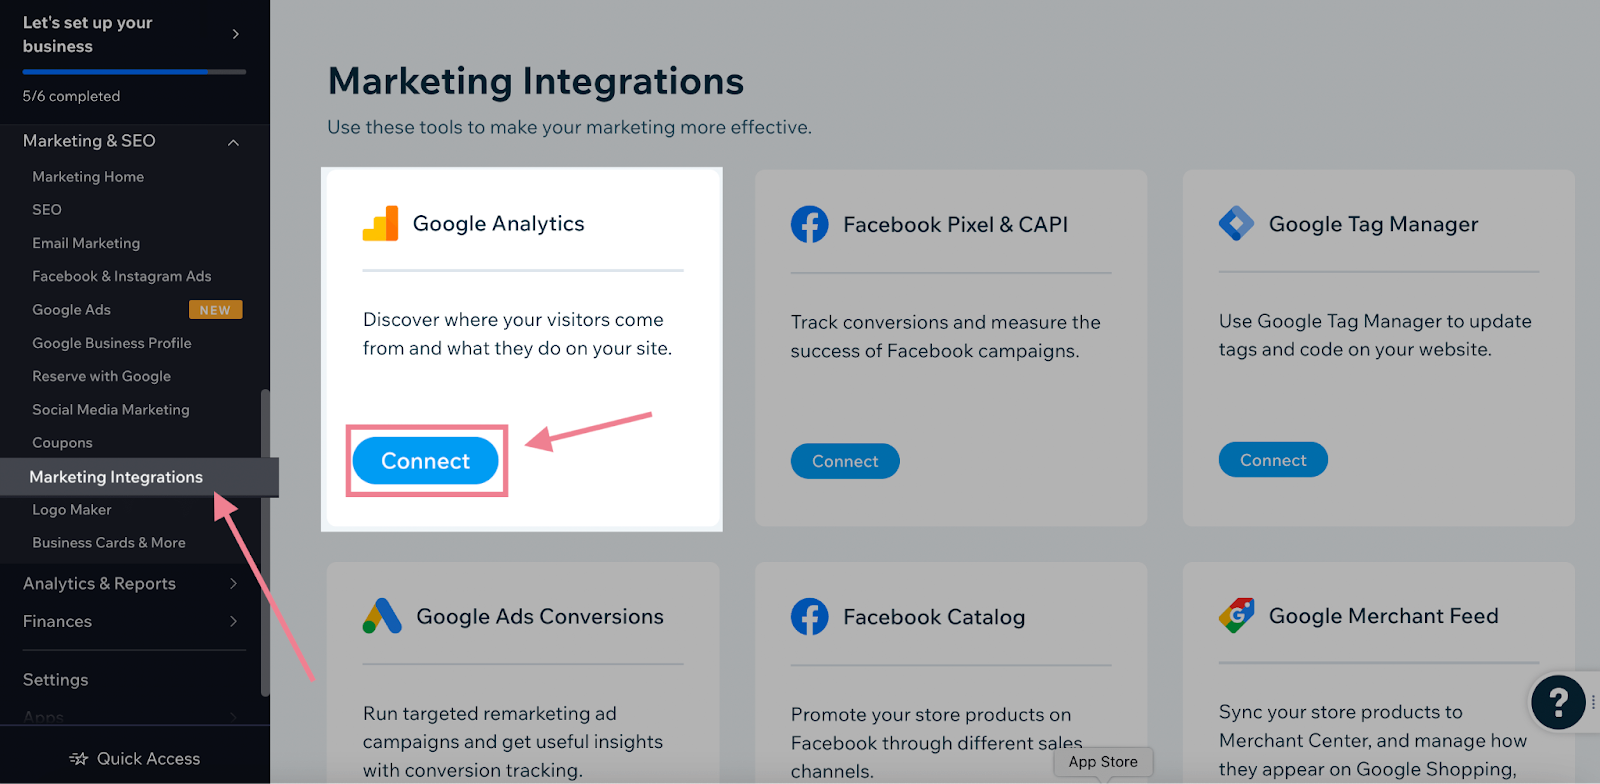 Connect Google Analytics under Marketing Integrations page in Wix